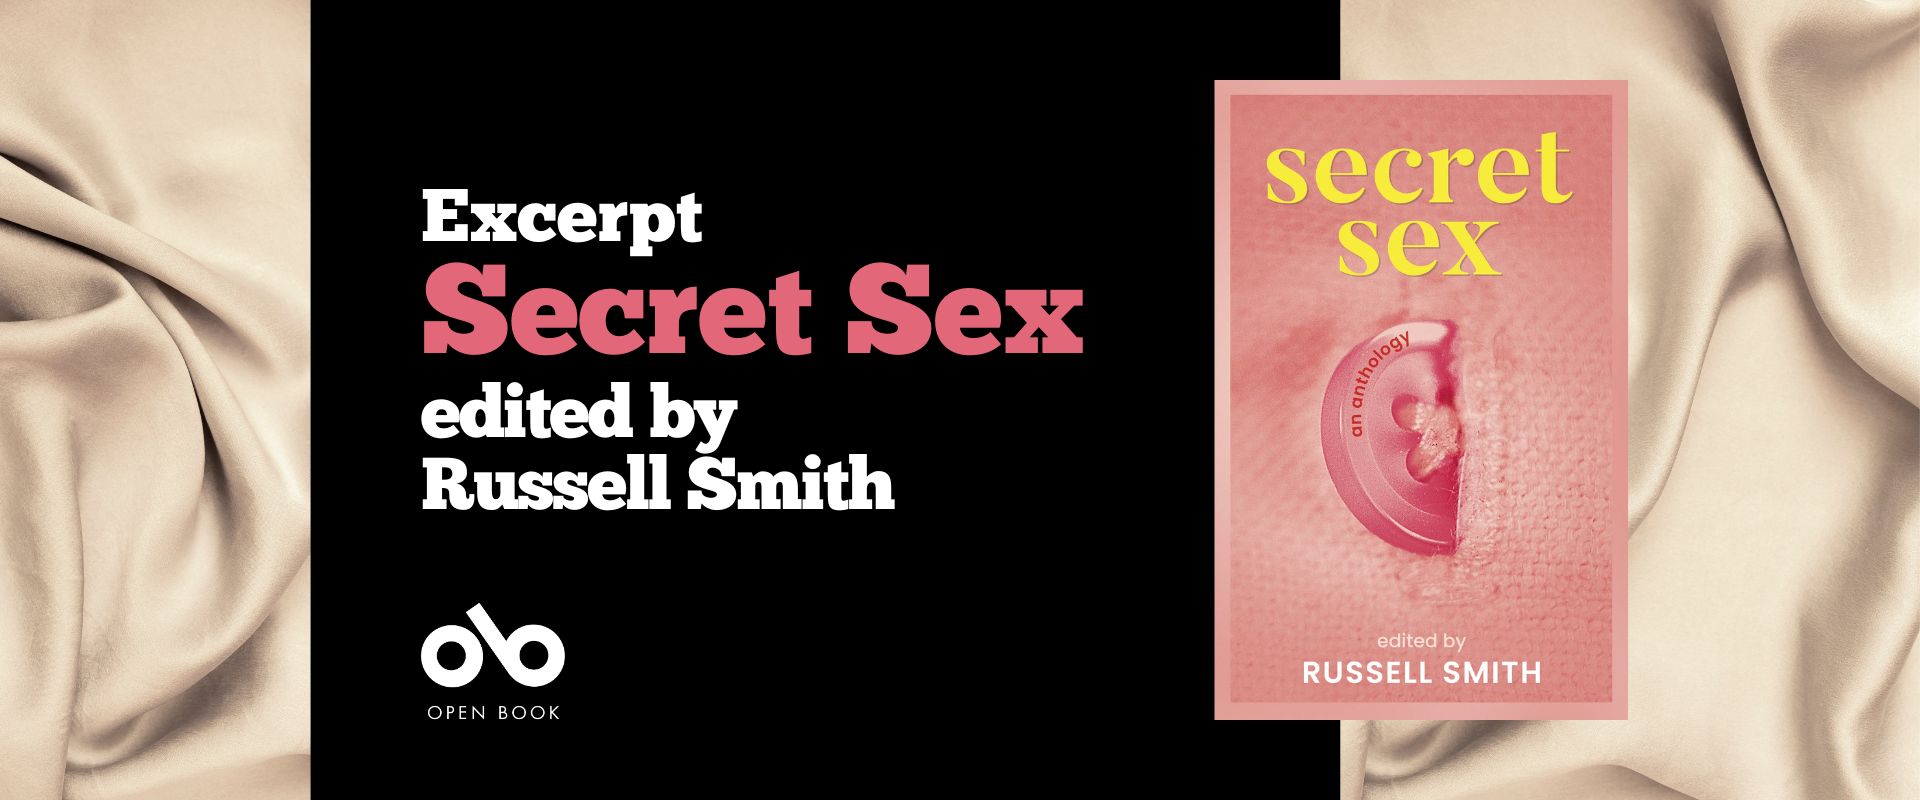 Banner image with a background of light coloured silk sheets. A black banner reads Excerpt from Secret Sex edited by Russell Smith. Image of the cover of Secret Sex on the right. Open Book logo bottom left.